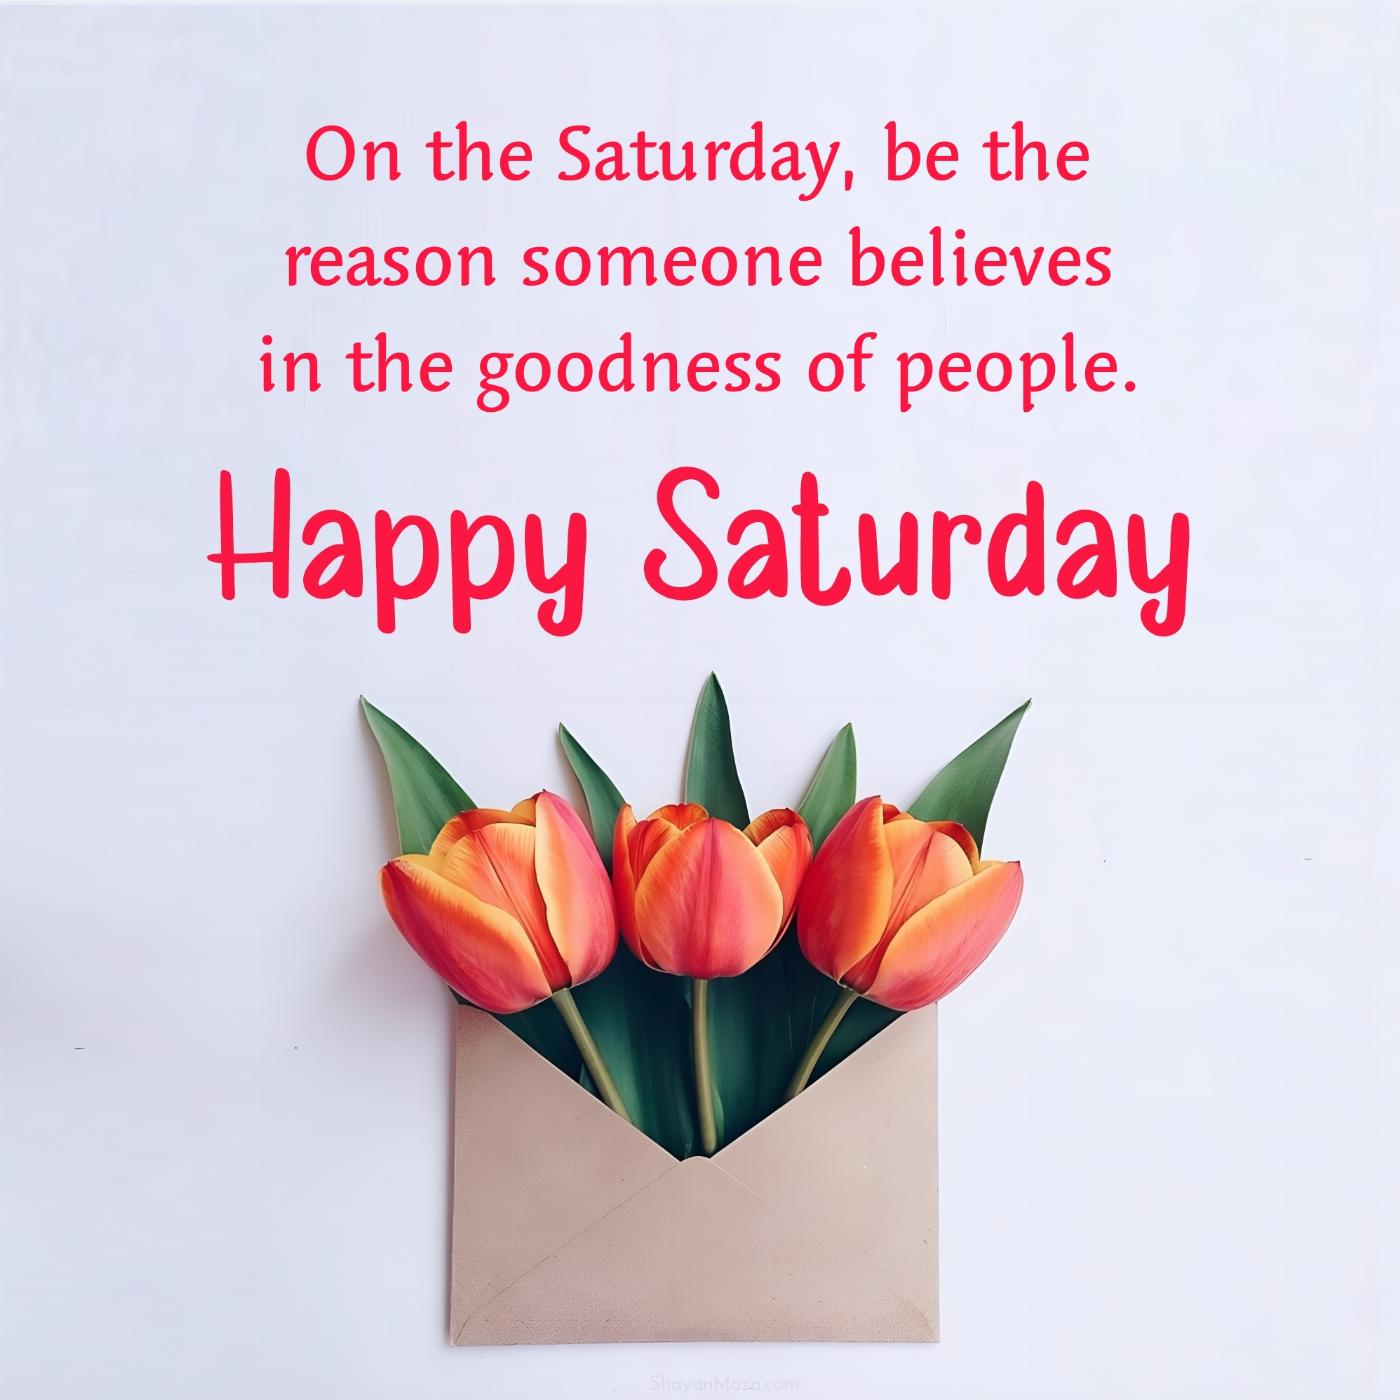 On the Saturday be the reason someone believes in the goodness